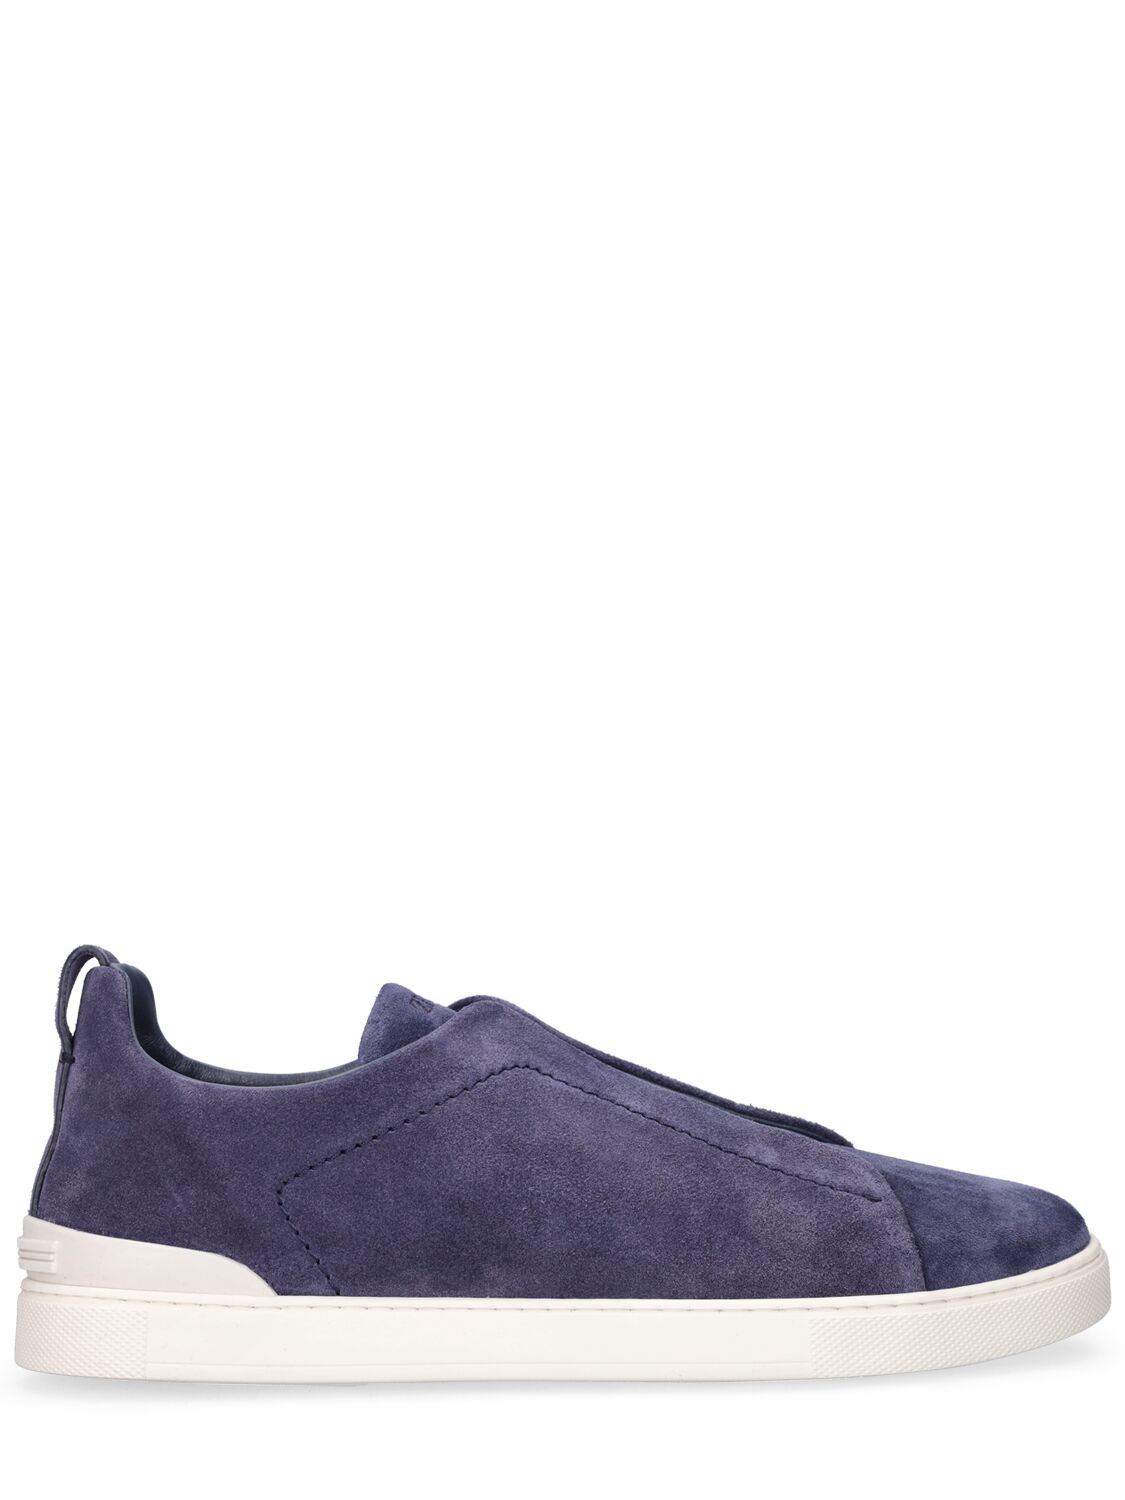 ZEGNA TRIPLE STITCH SUEDE LOW-TOP SNEAKERS